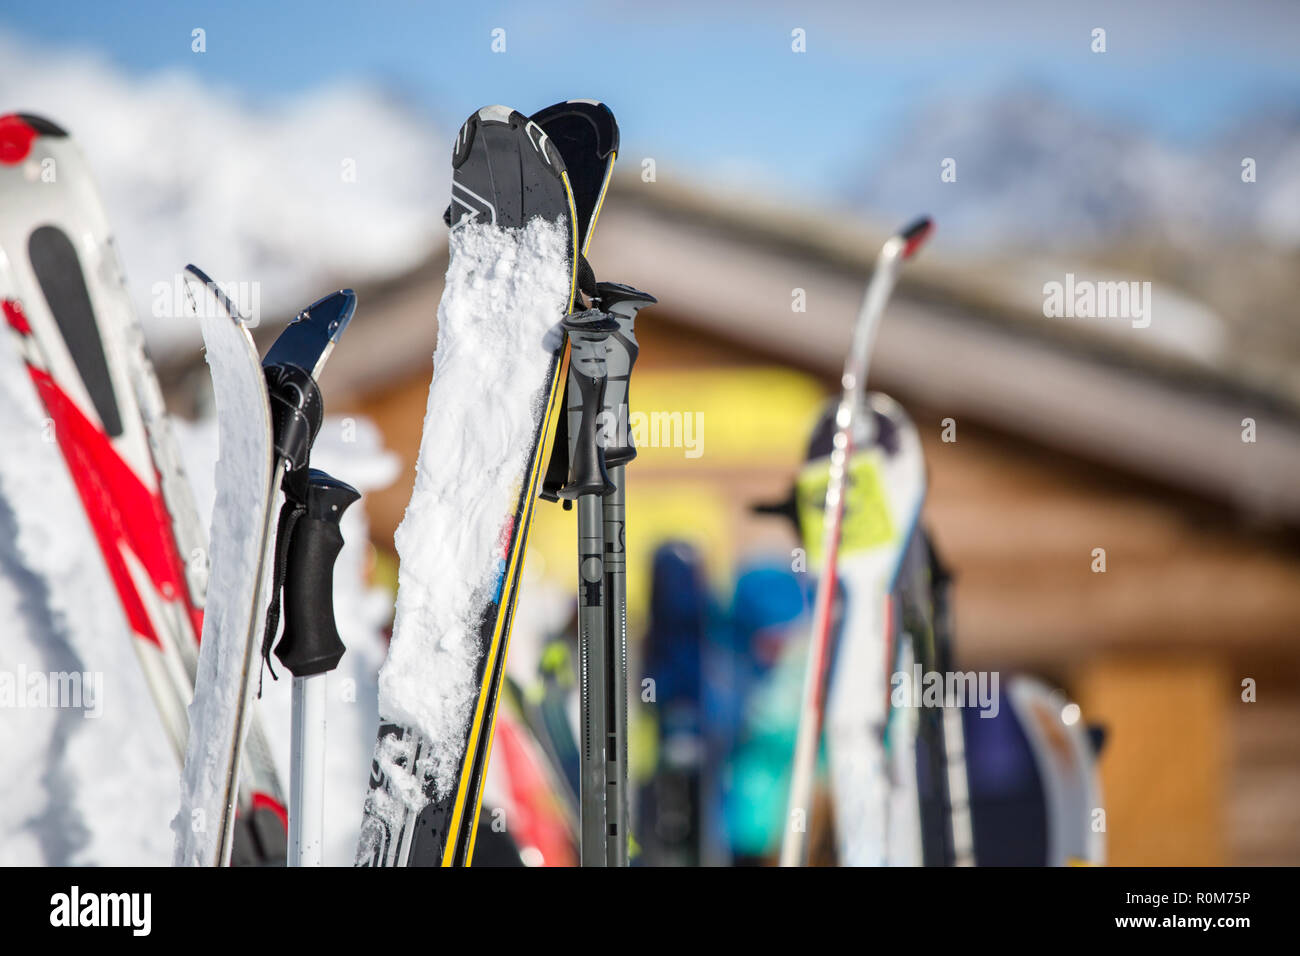 Image of multi-colored skis in snow at winter resort in afternoon. Stock Photo